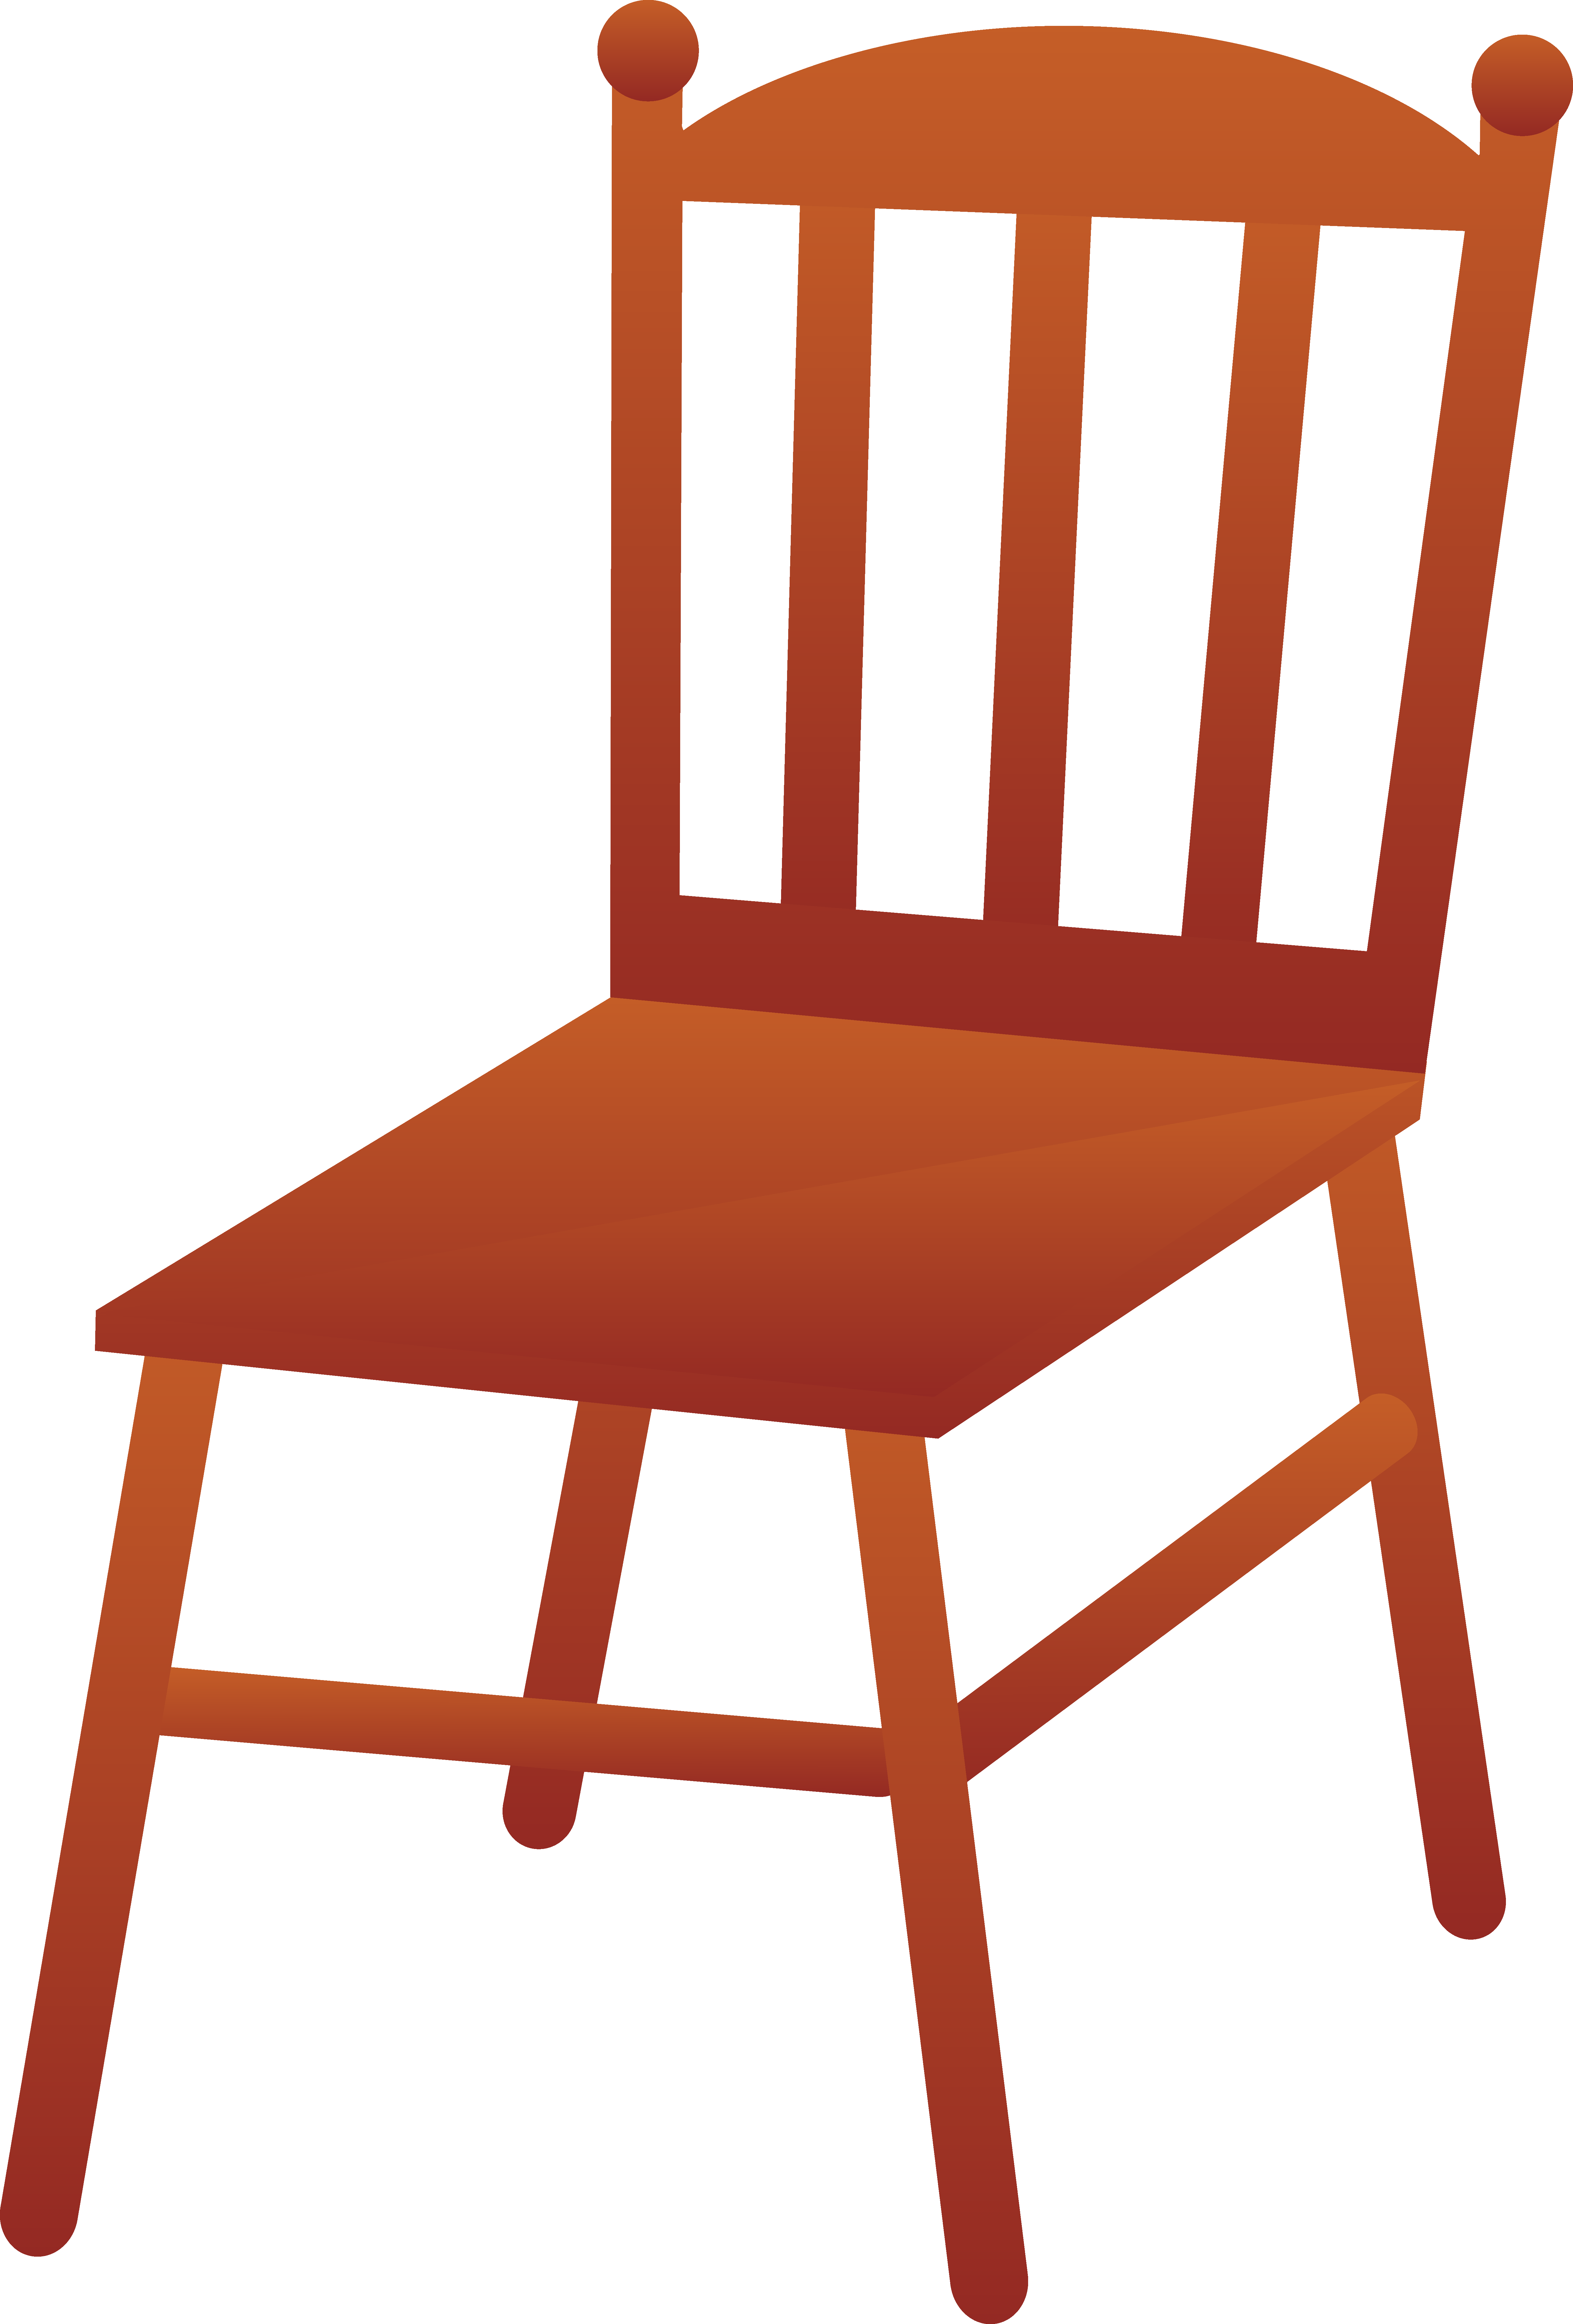 Cartoon Chair Images & Pictures - Becuo